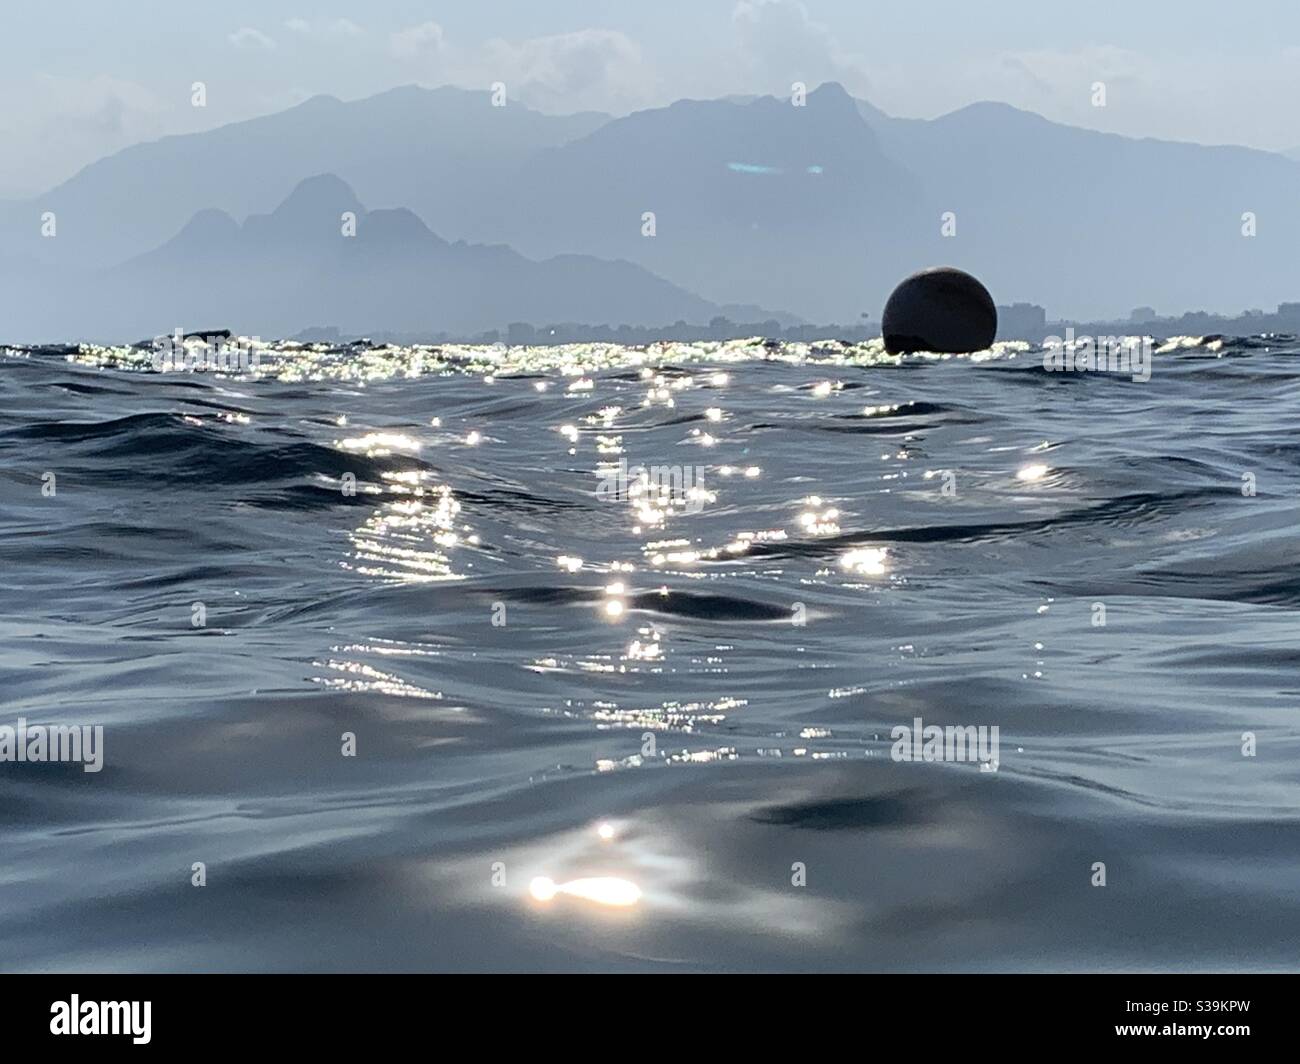 Sparkly water at Mermerli beach with round buoy silhouetted against mountains in the distance Stock Photo